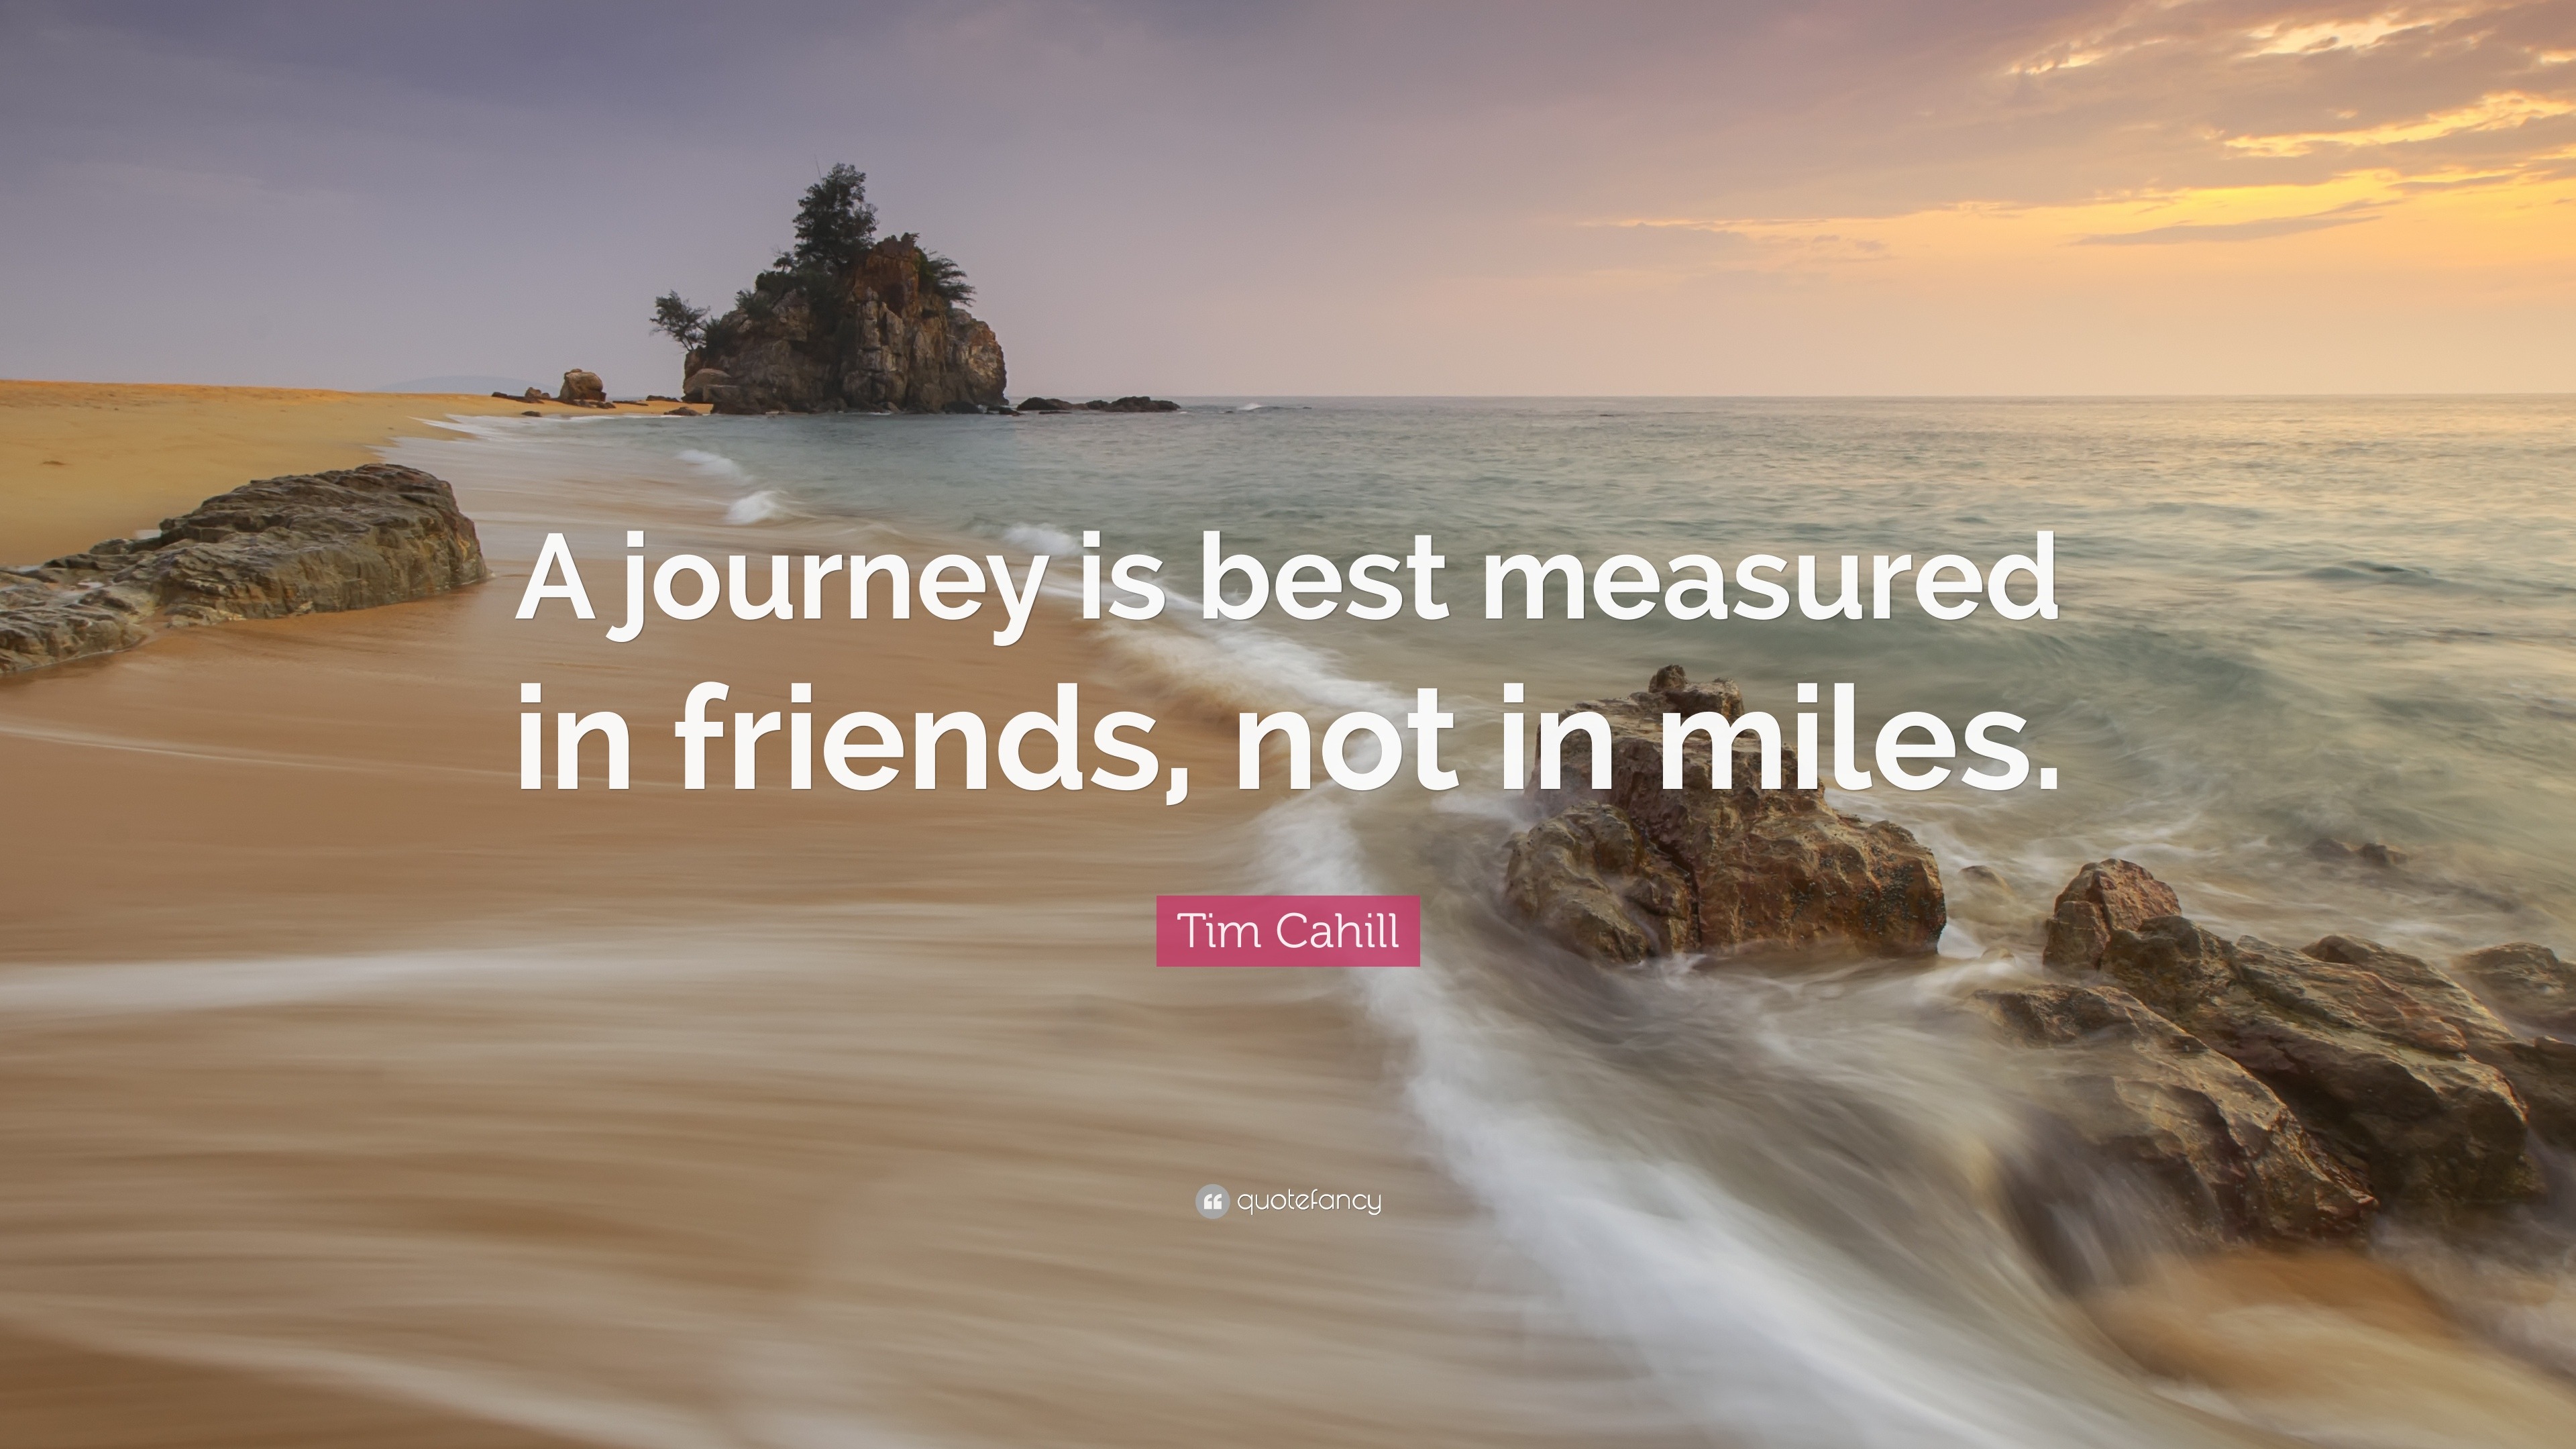 Tim Cahill Quote “A journey is best measured in friends